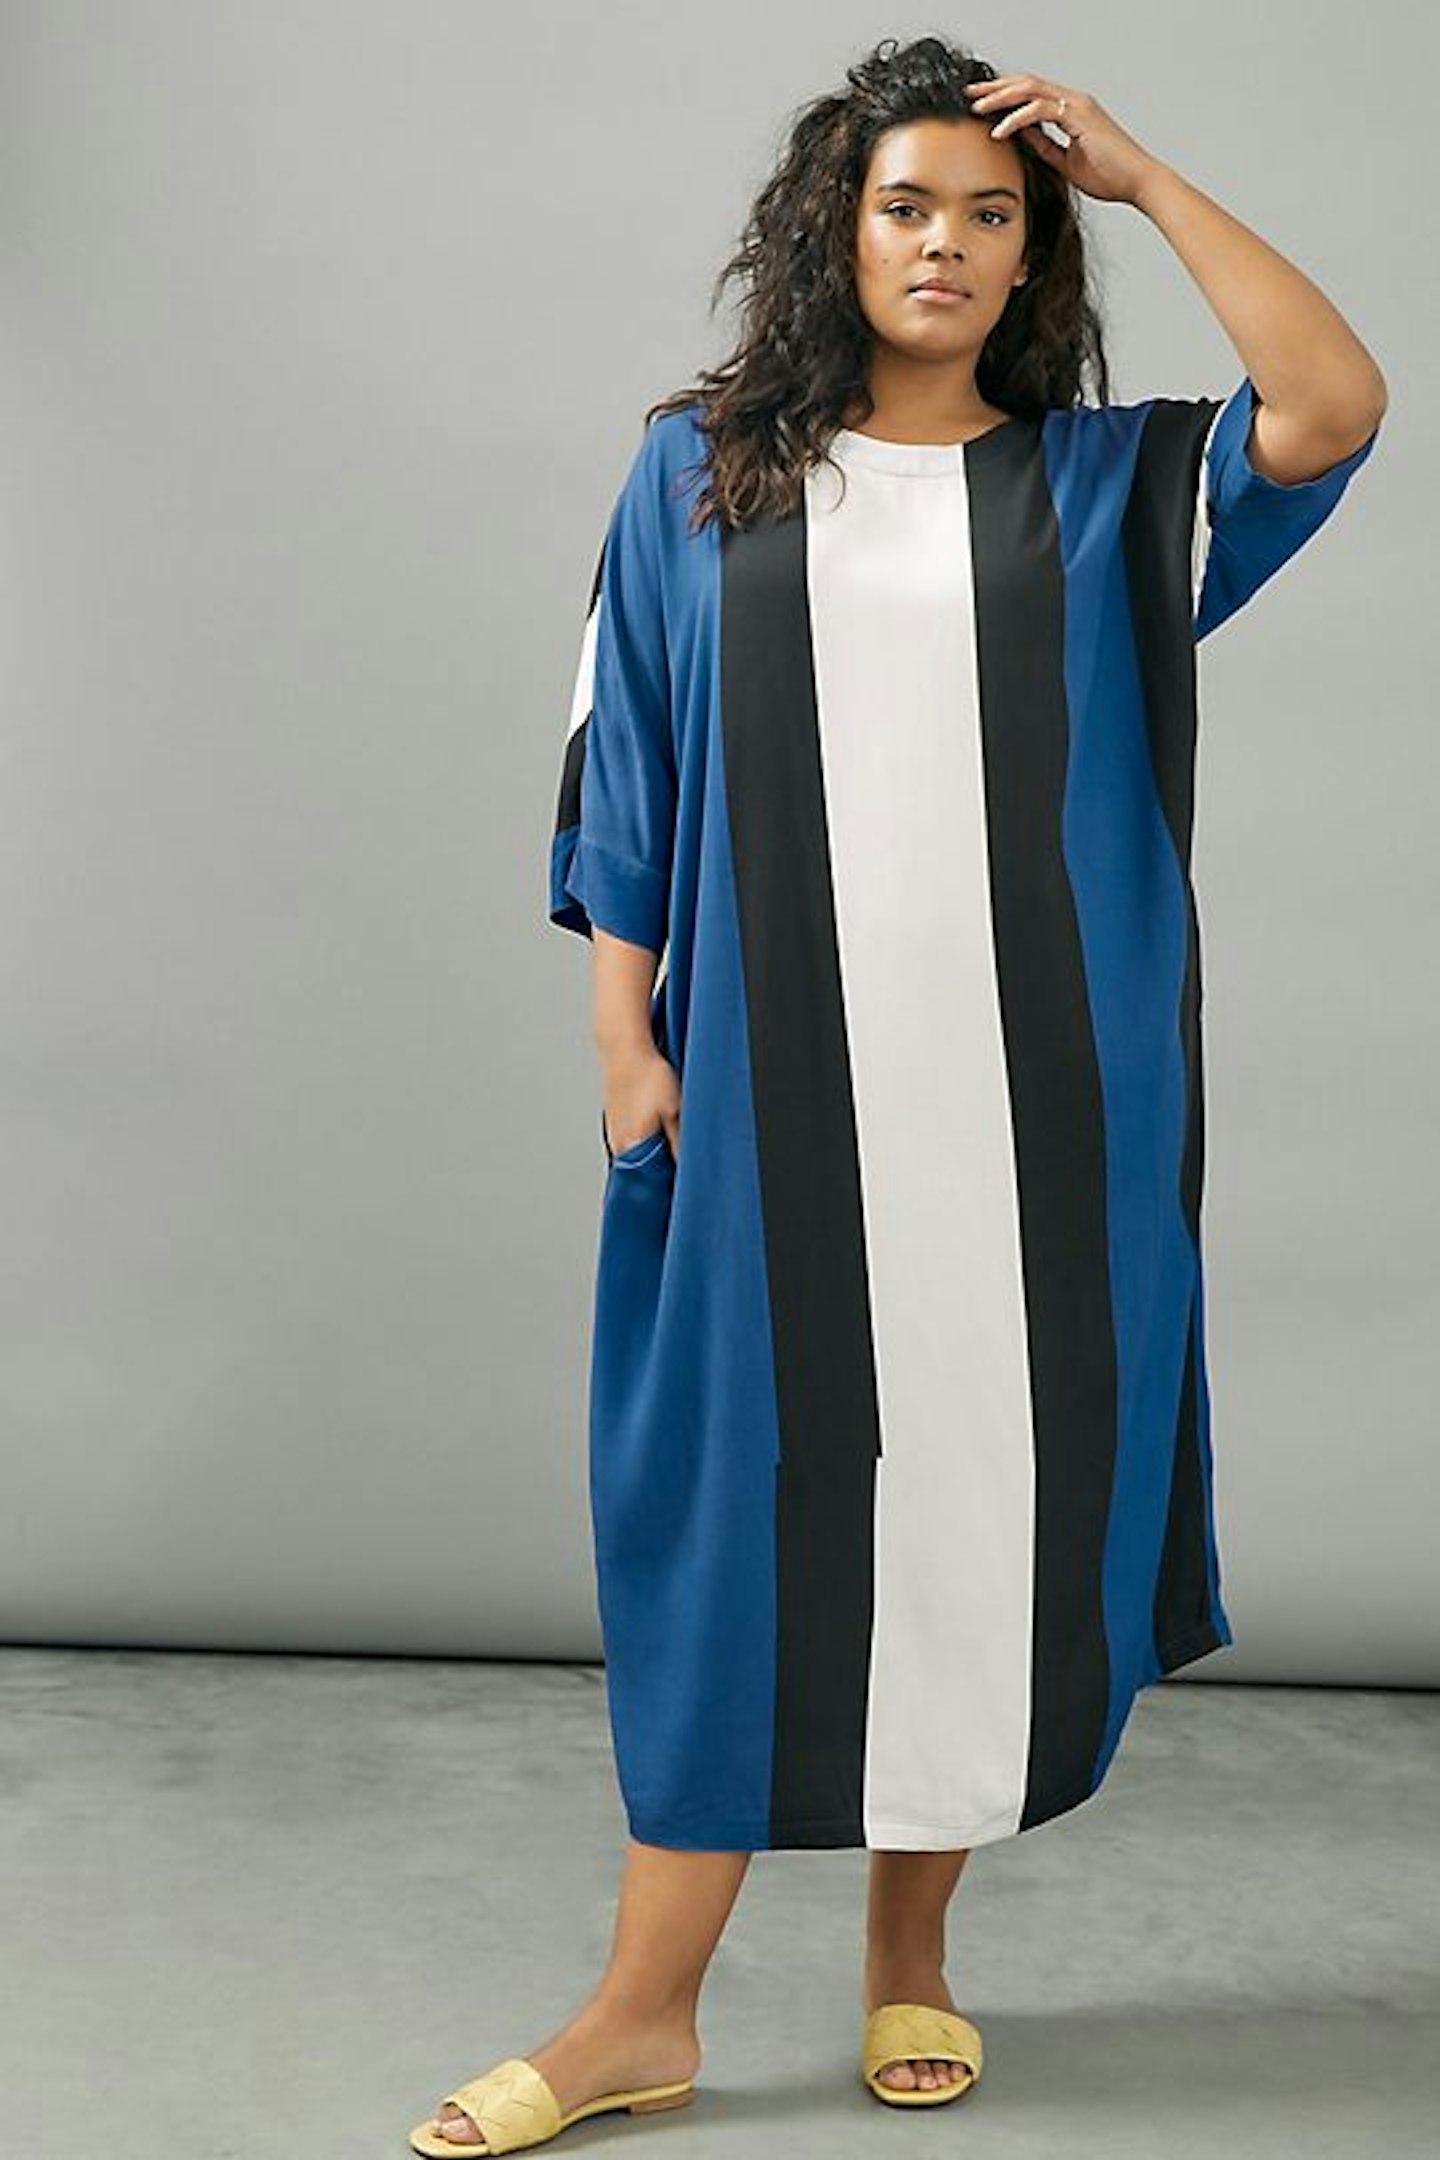 Peter Som for Anthropologie, Calanthe Striped Maxi Dress, £120